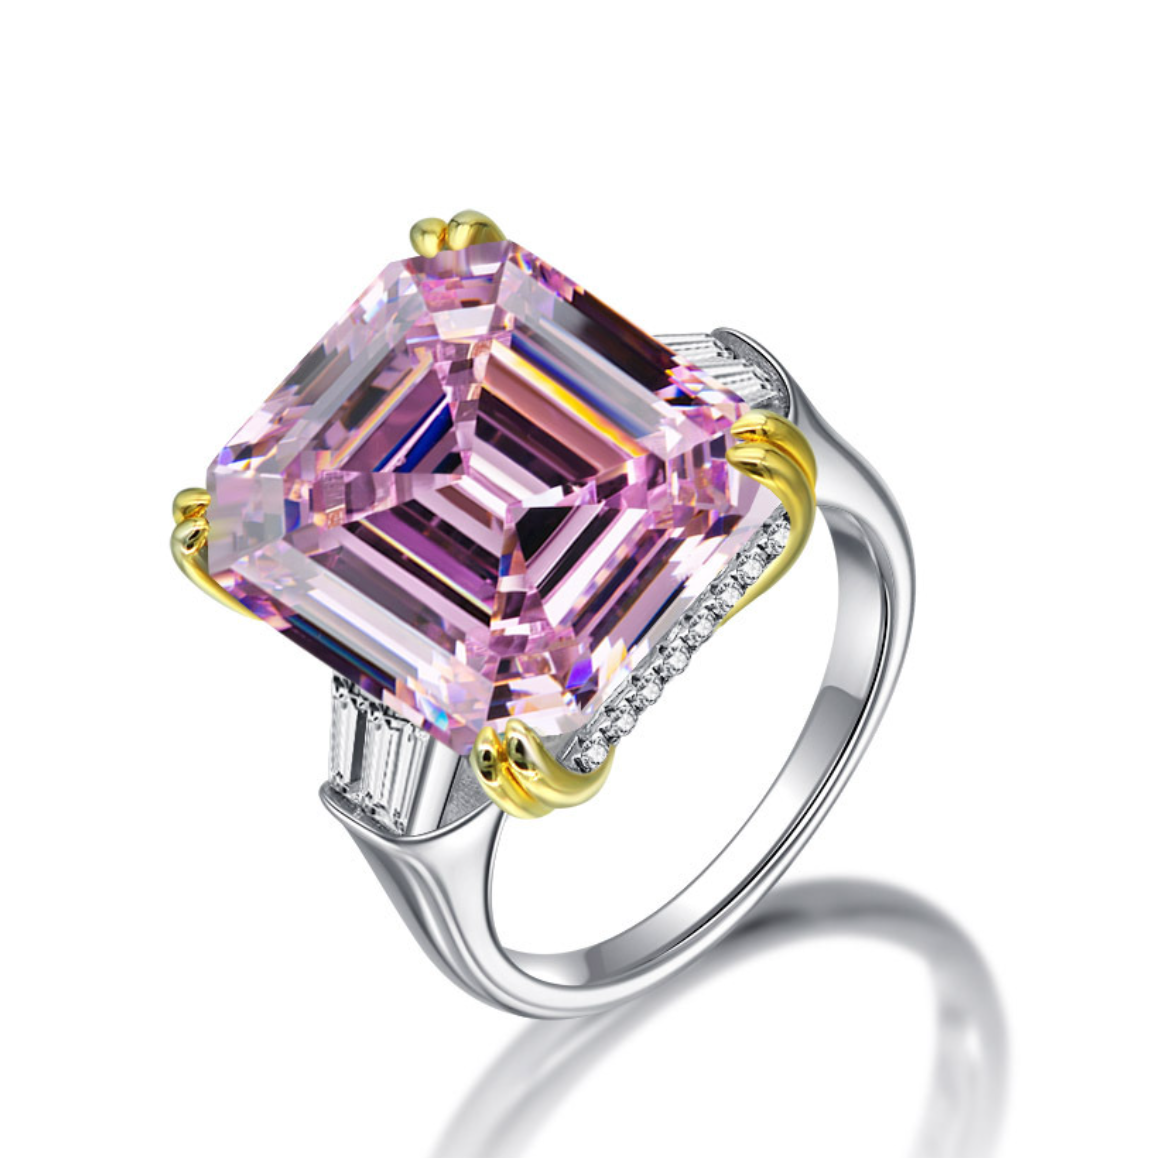 Our exceptional 9.52 Carat Fancy Pink Asscher Cut Engagement Ring with tapered baguettes and a hidden halo of micro pave under the centre stone makes the perfect promise ring or proposal ring for her by Margalit Rings